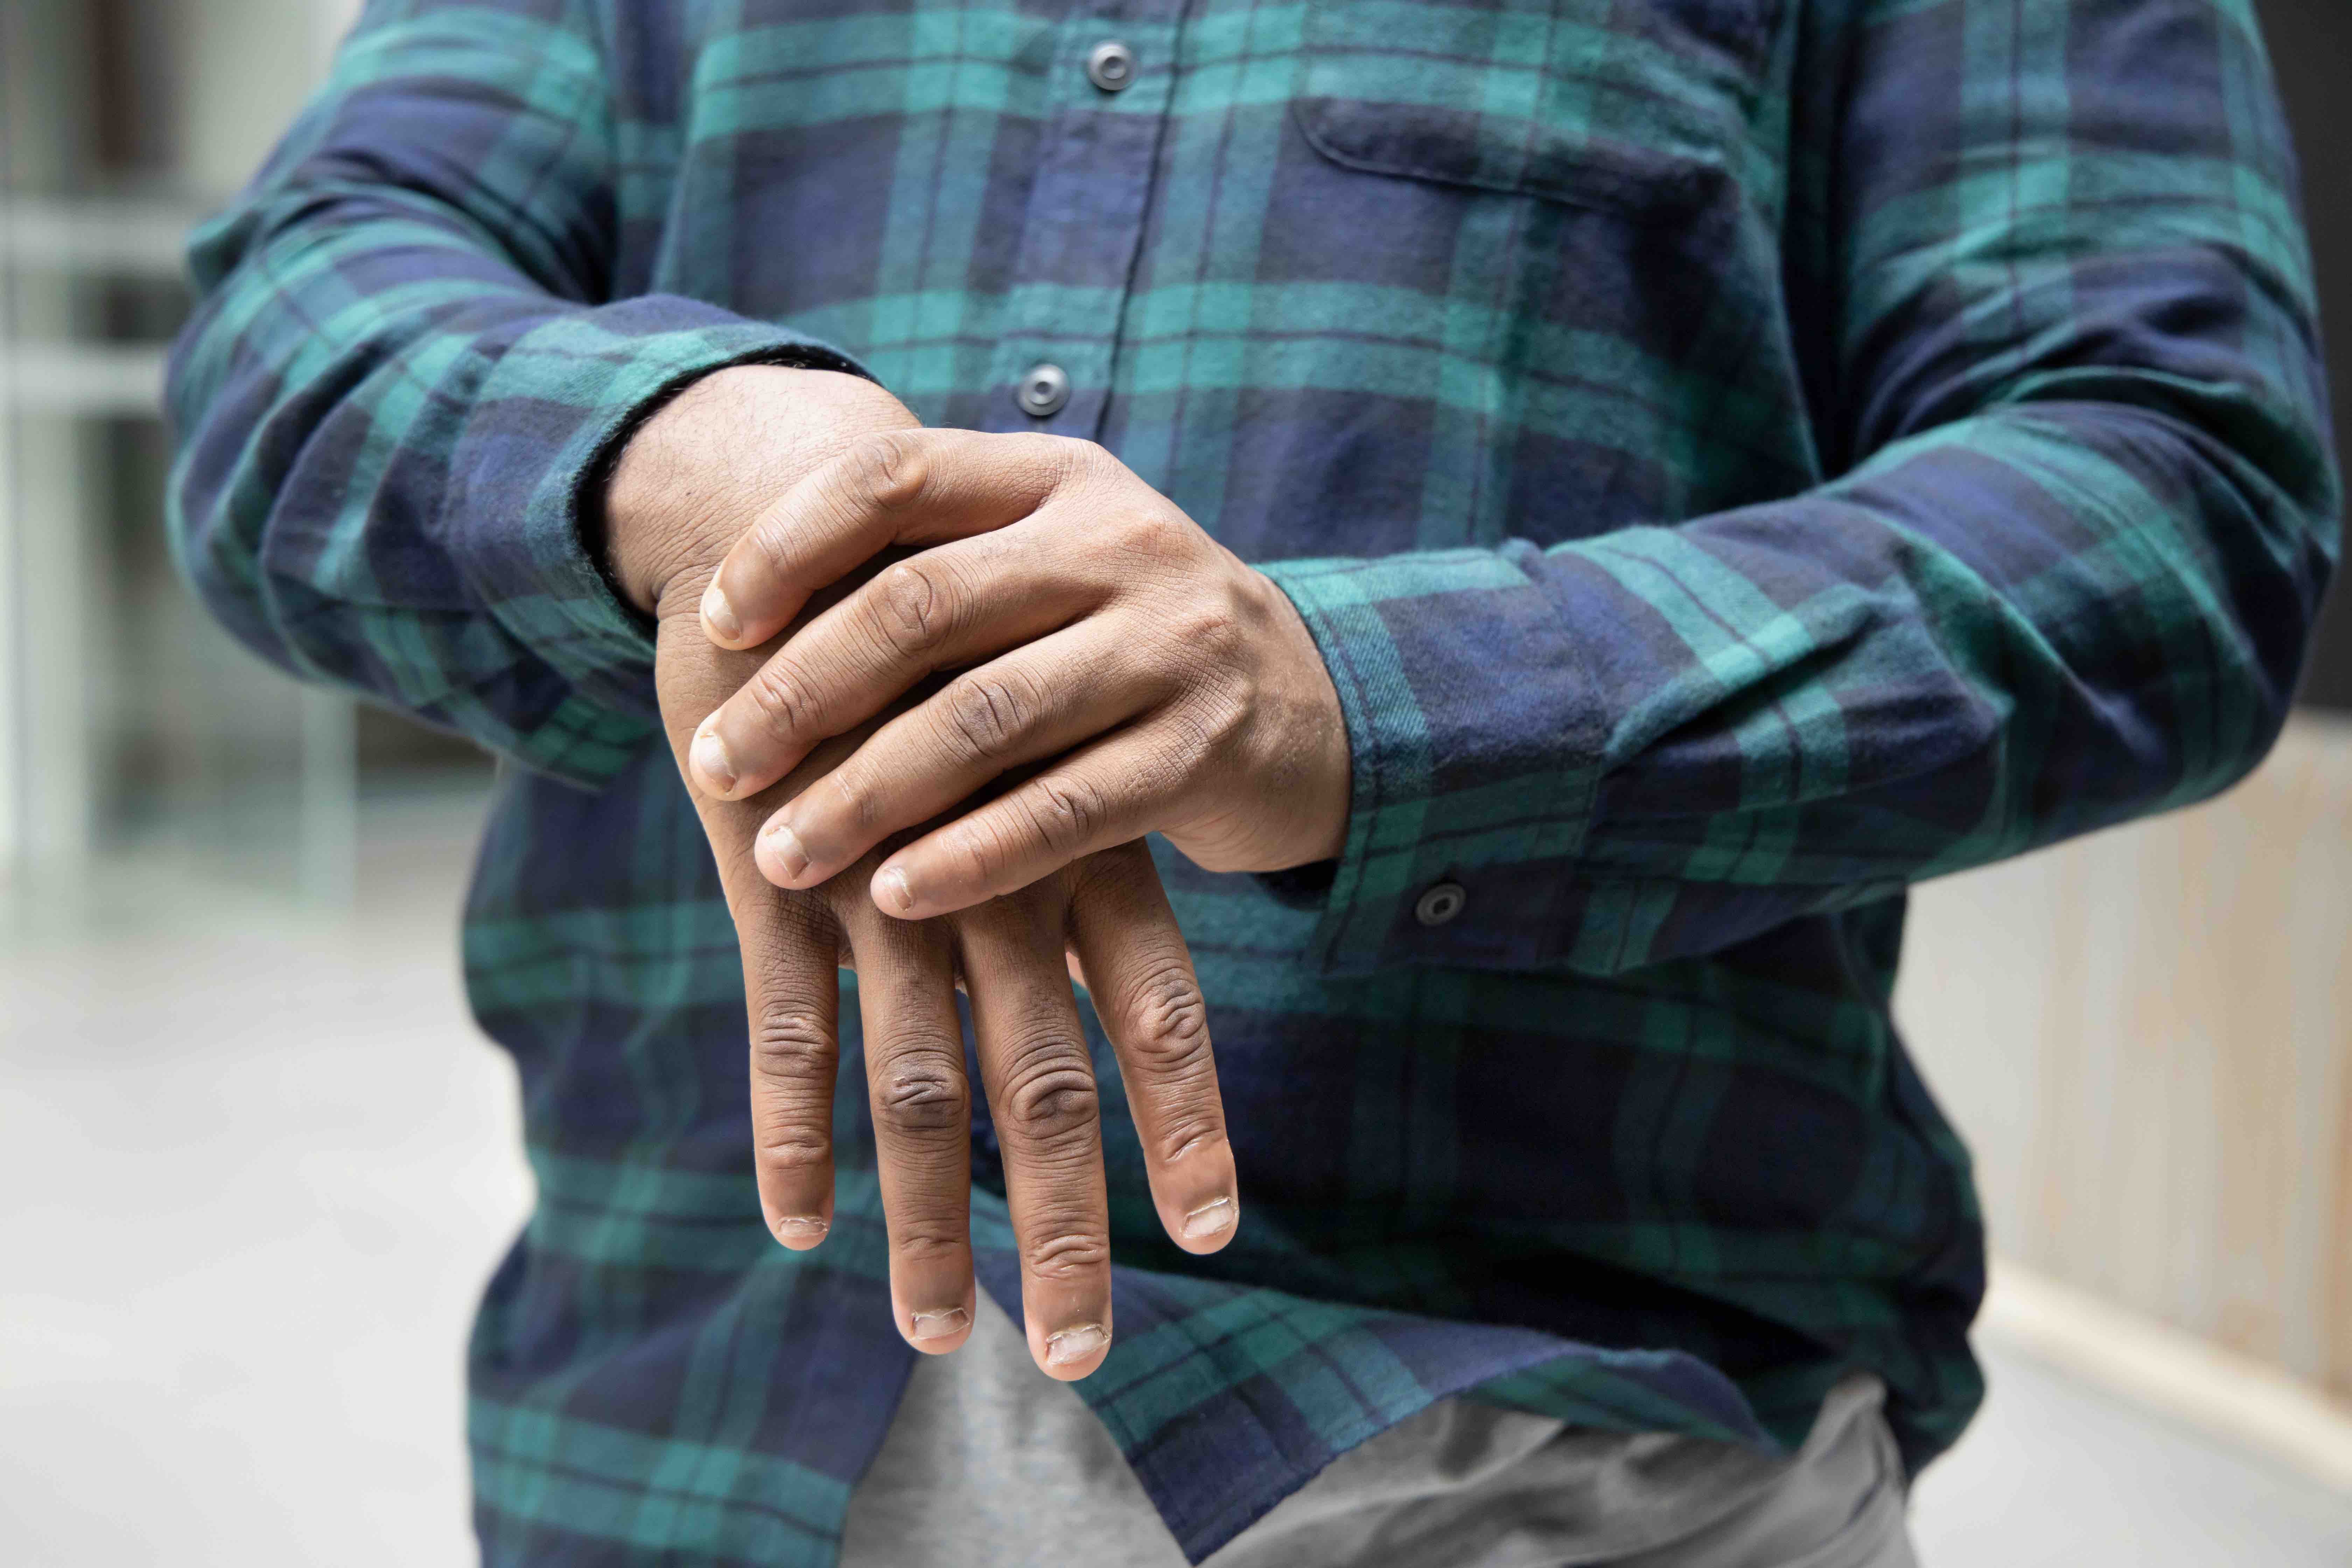 Obesity was linked with worse patient-reported pain outcomes in rheumatoid arthritis. | Image credit: 9nong - stock.adobe.com